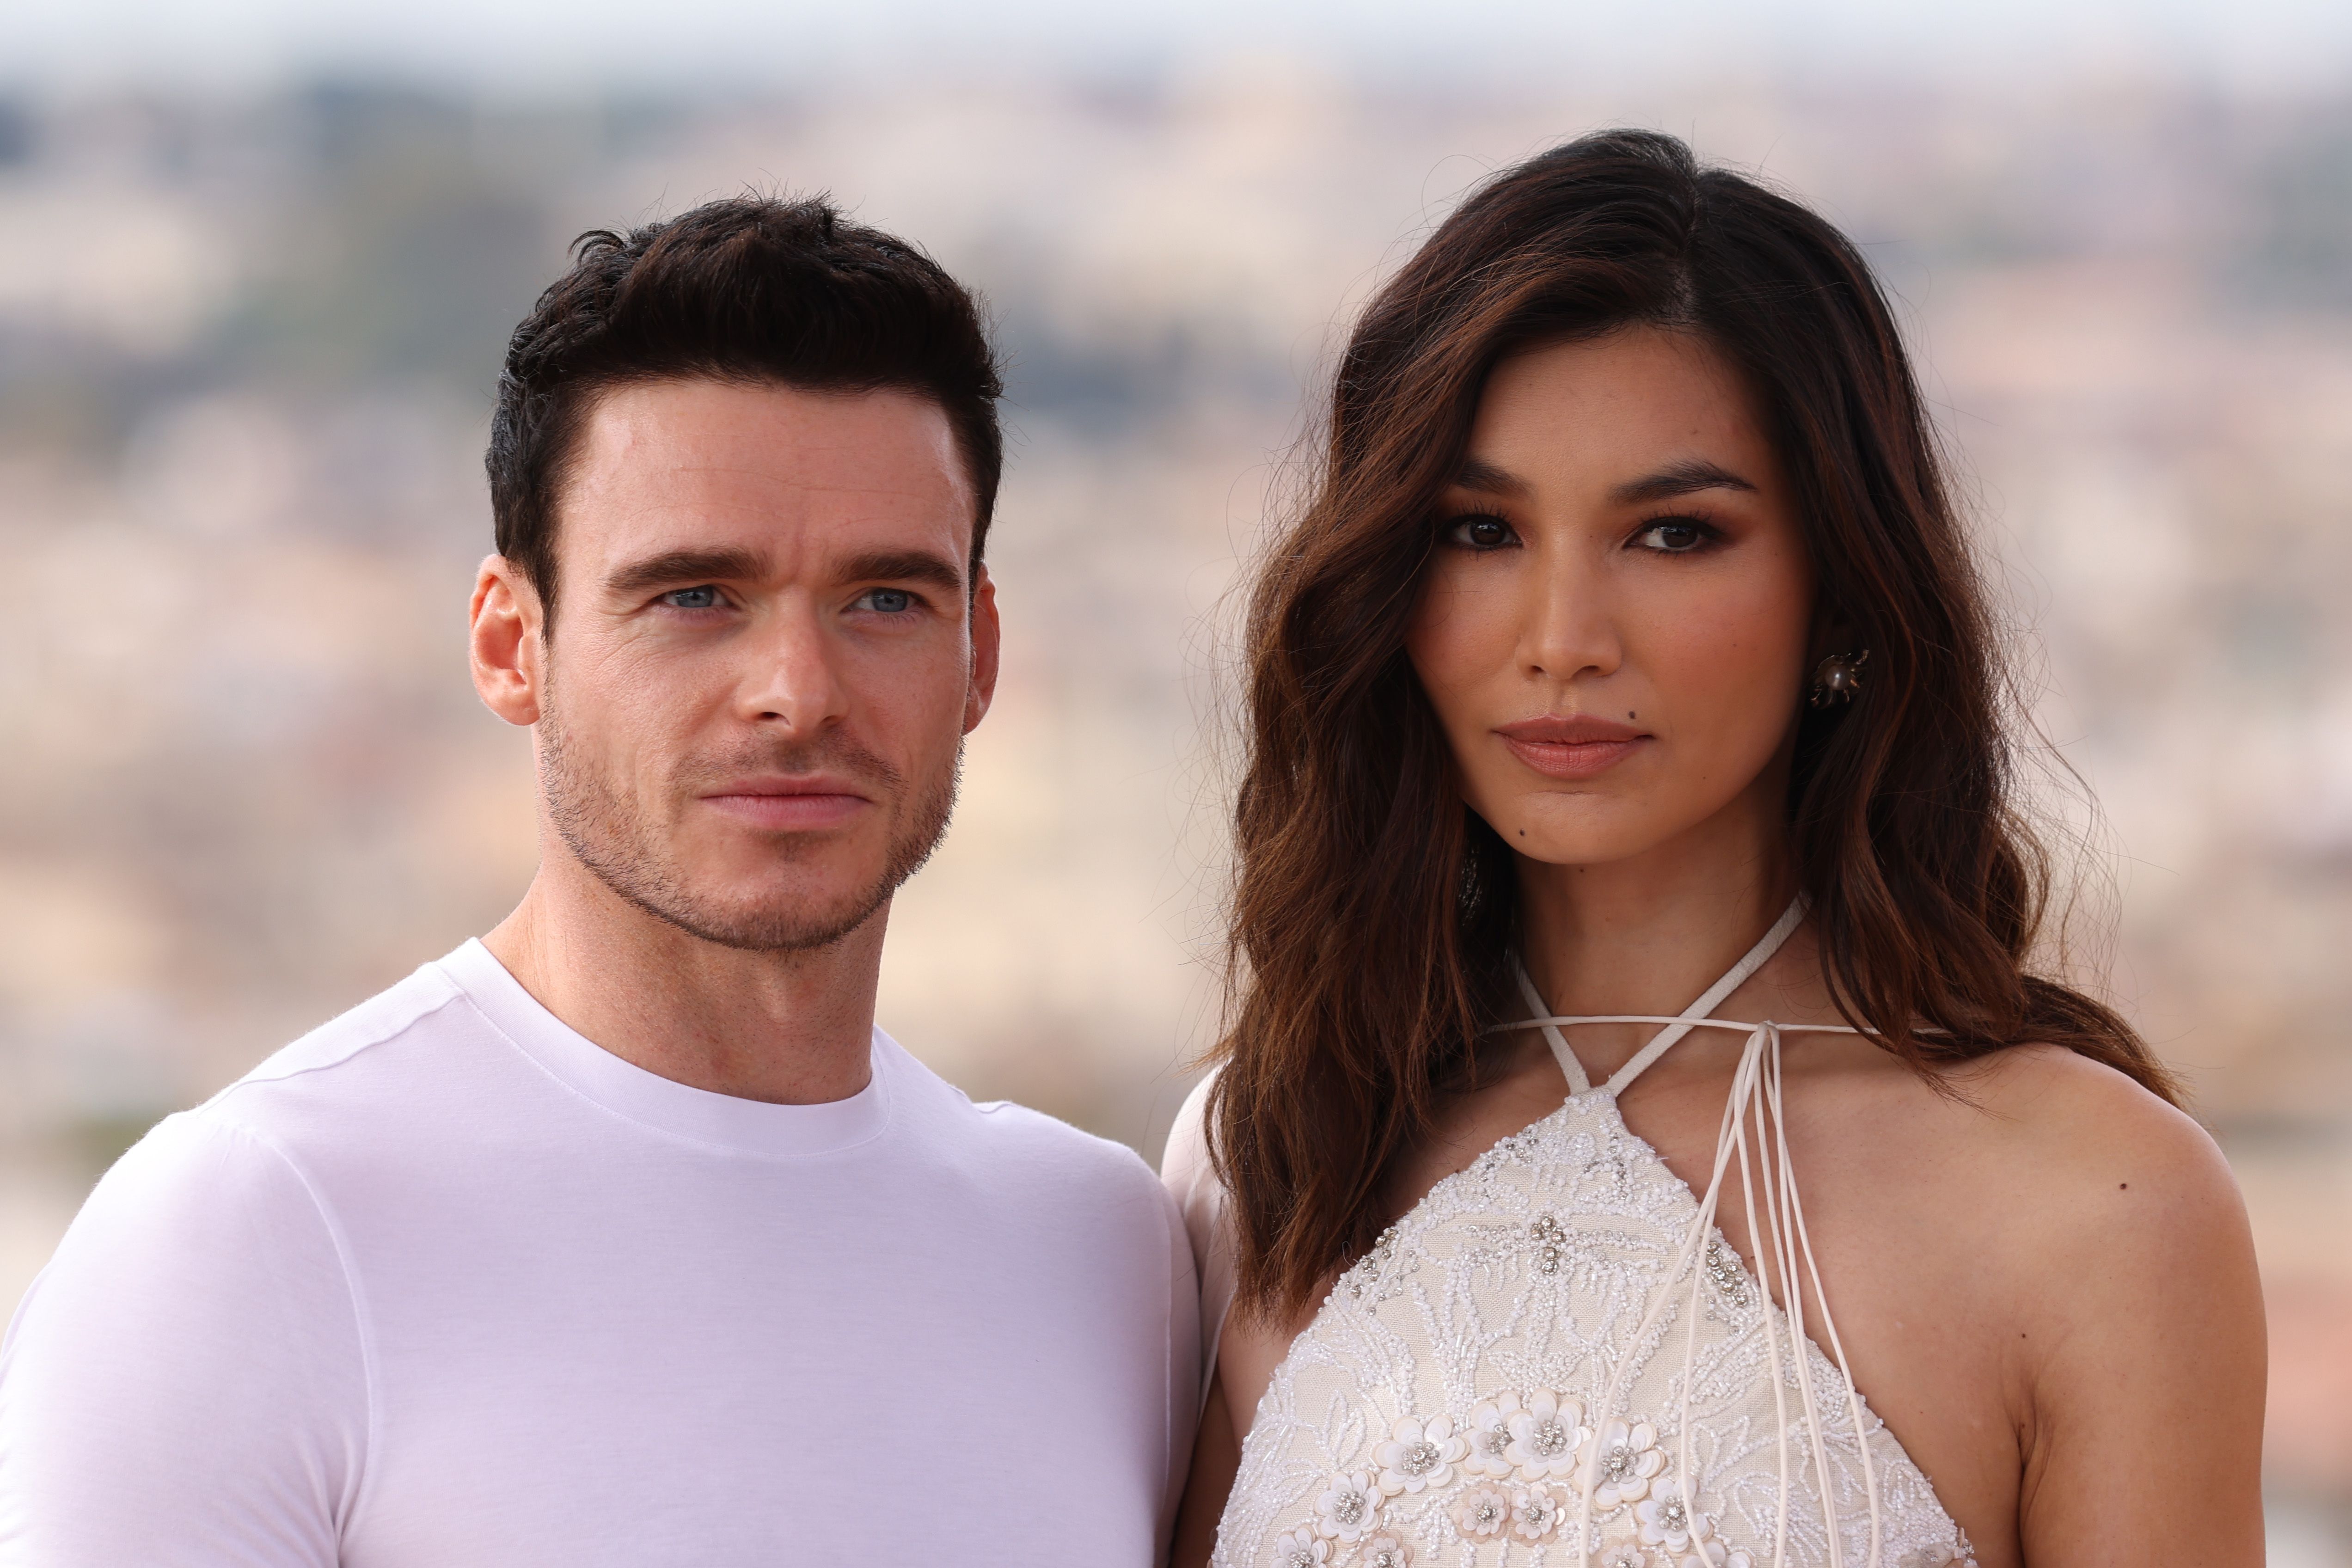 Marvel's 'Eternals' stars Richard Madden and Gemma Chan pose for a photo. Madden wears a white shirt. Chan wears a white dress with patterned flowers on it.